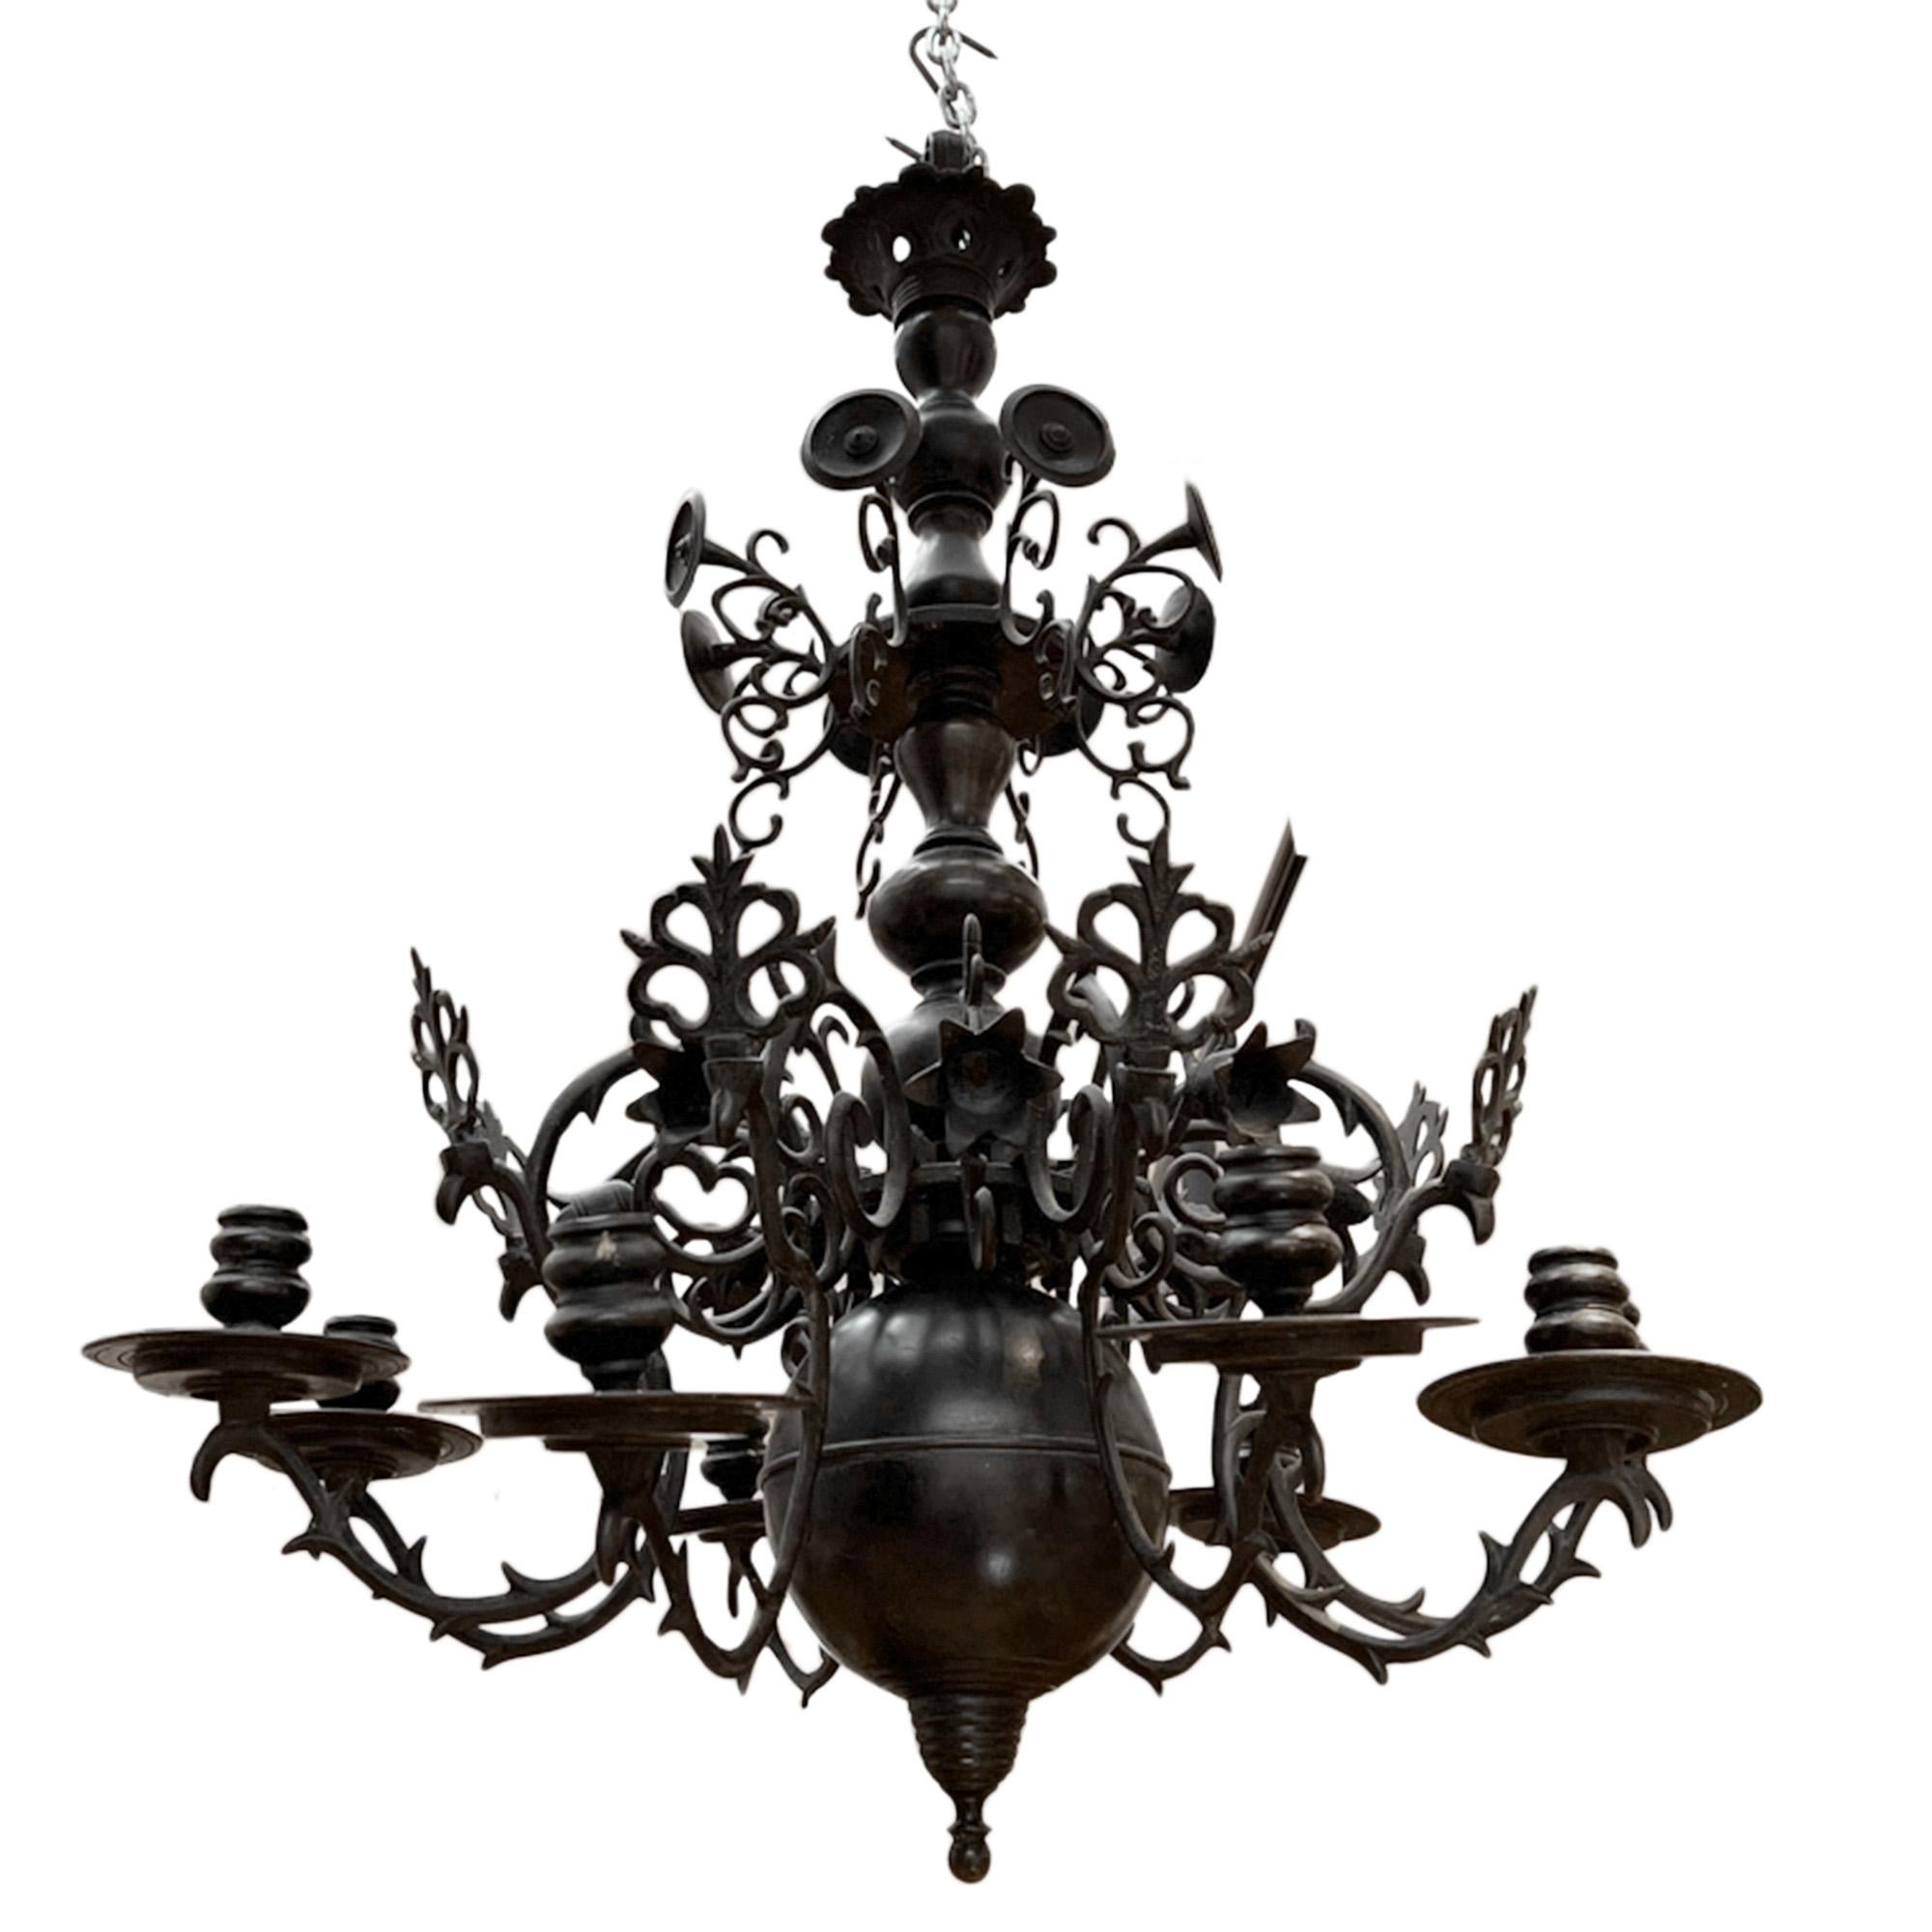 This unusual chandelier was made in The Netherlands in the late 19th century.

Very decorative design with eight arms and attractive naturalistic features. 

A statement piece of lighting.

Rewired. 

Shades not required.